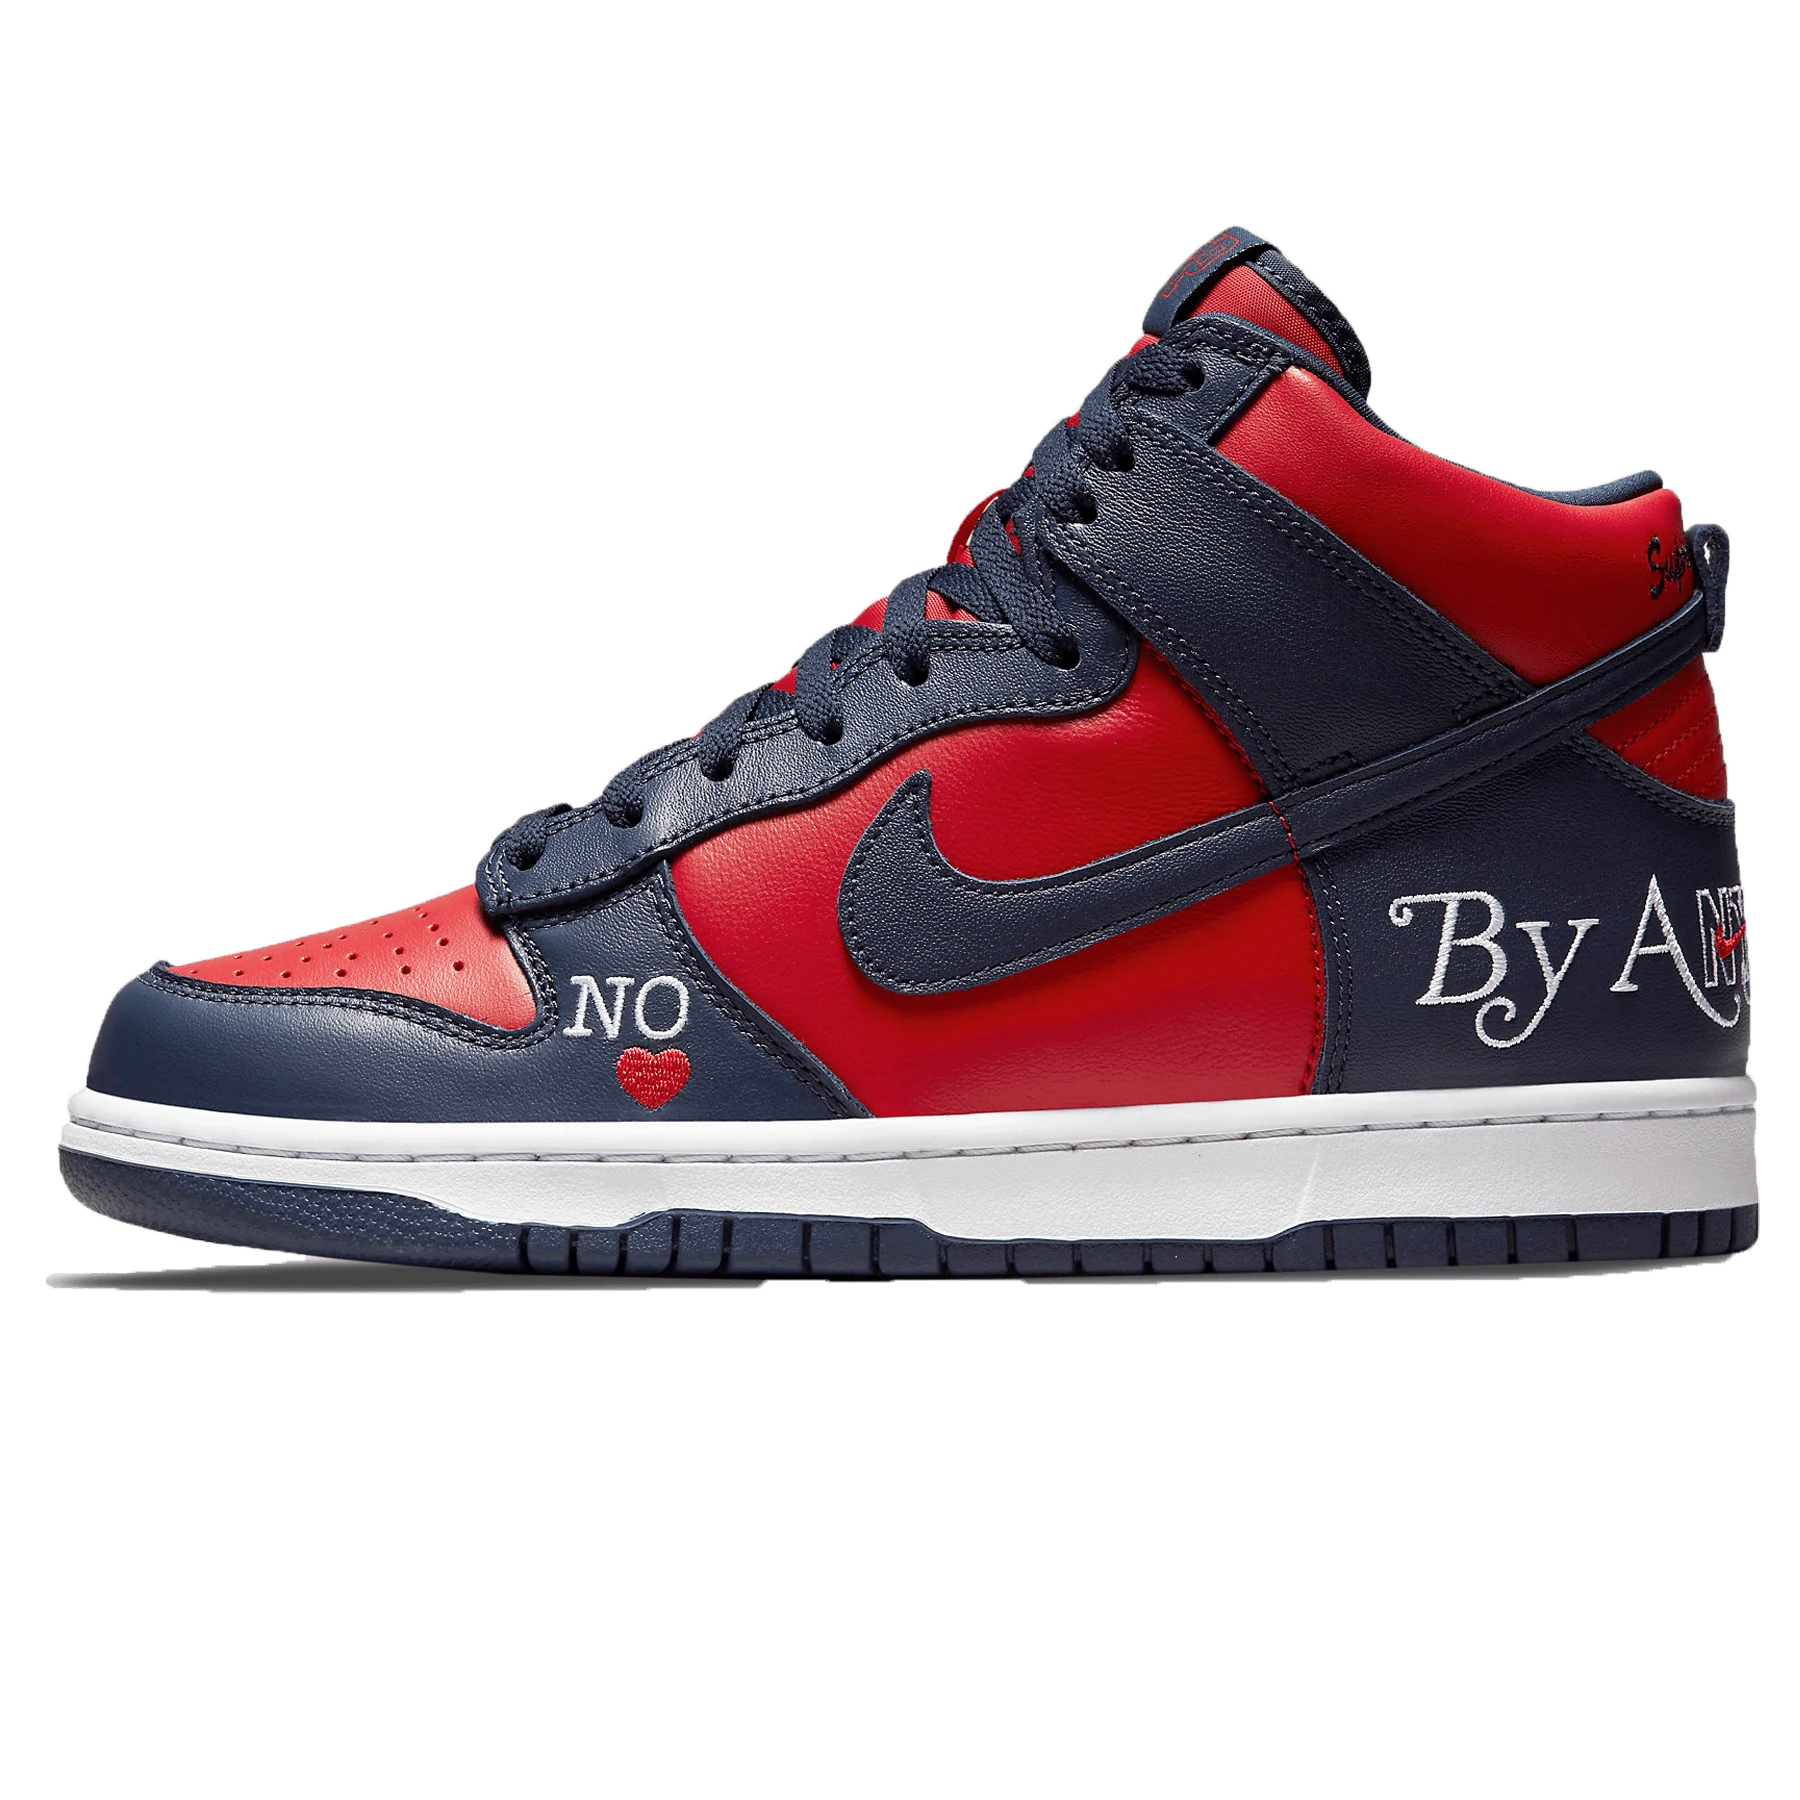 Double Boxed  264.99 Nike SB Dunk High x Supreme By Any Means Red Navy Double Boxed